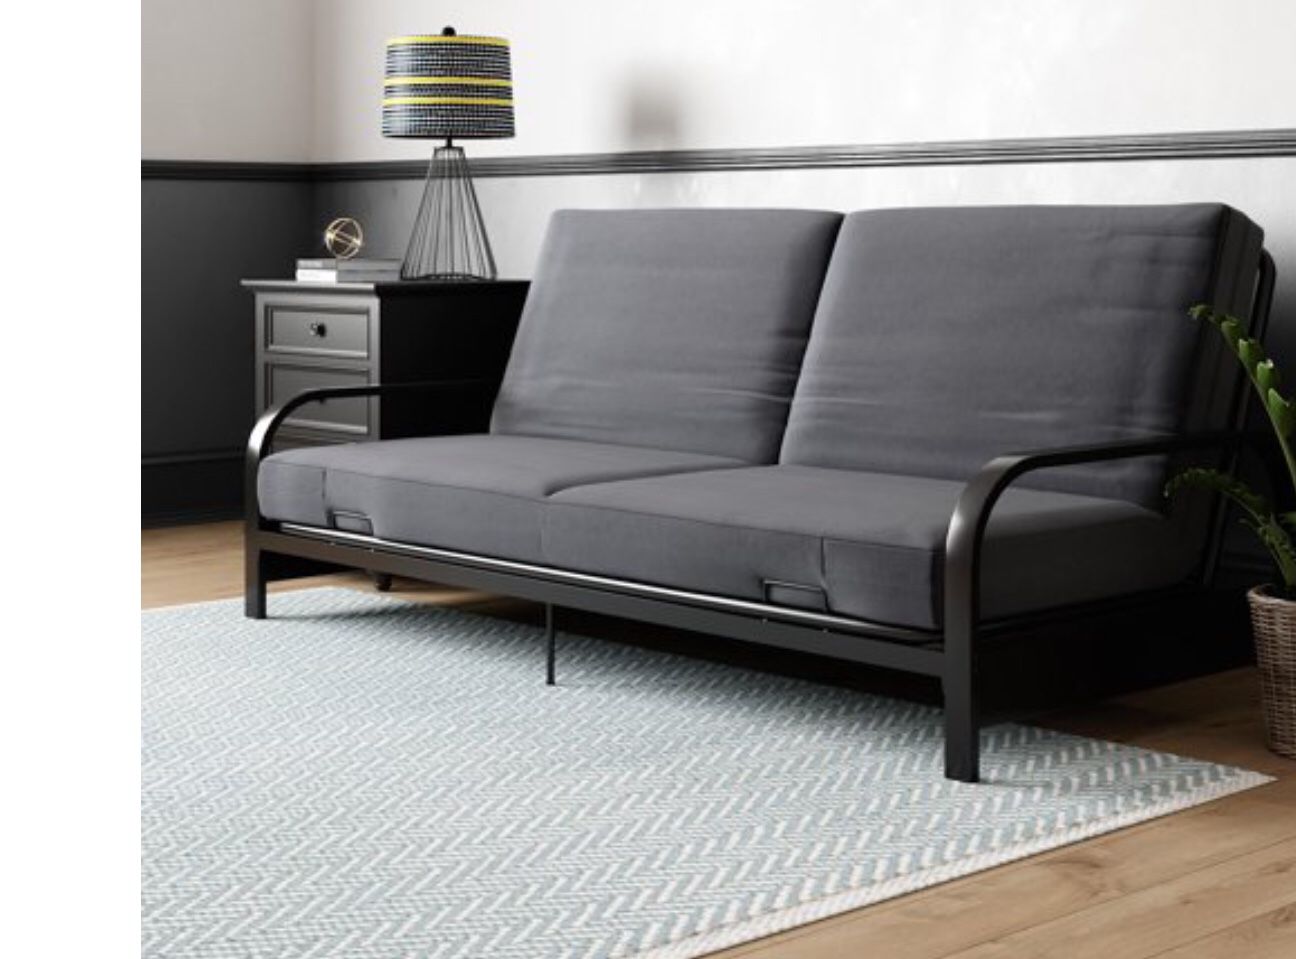 Futon, Sofa, Sleeper, Buest Bed, Gray And Black , Metal Arms 